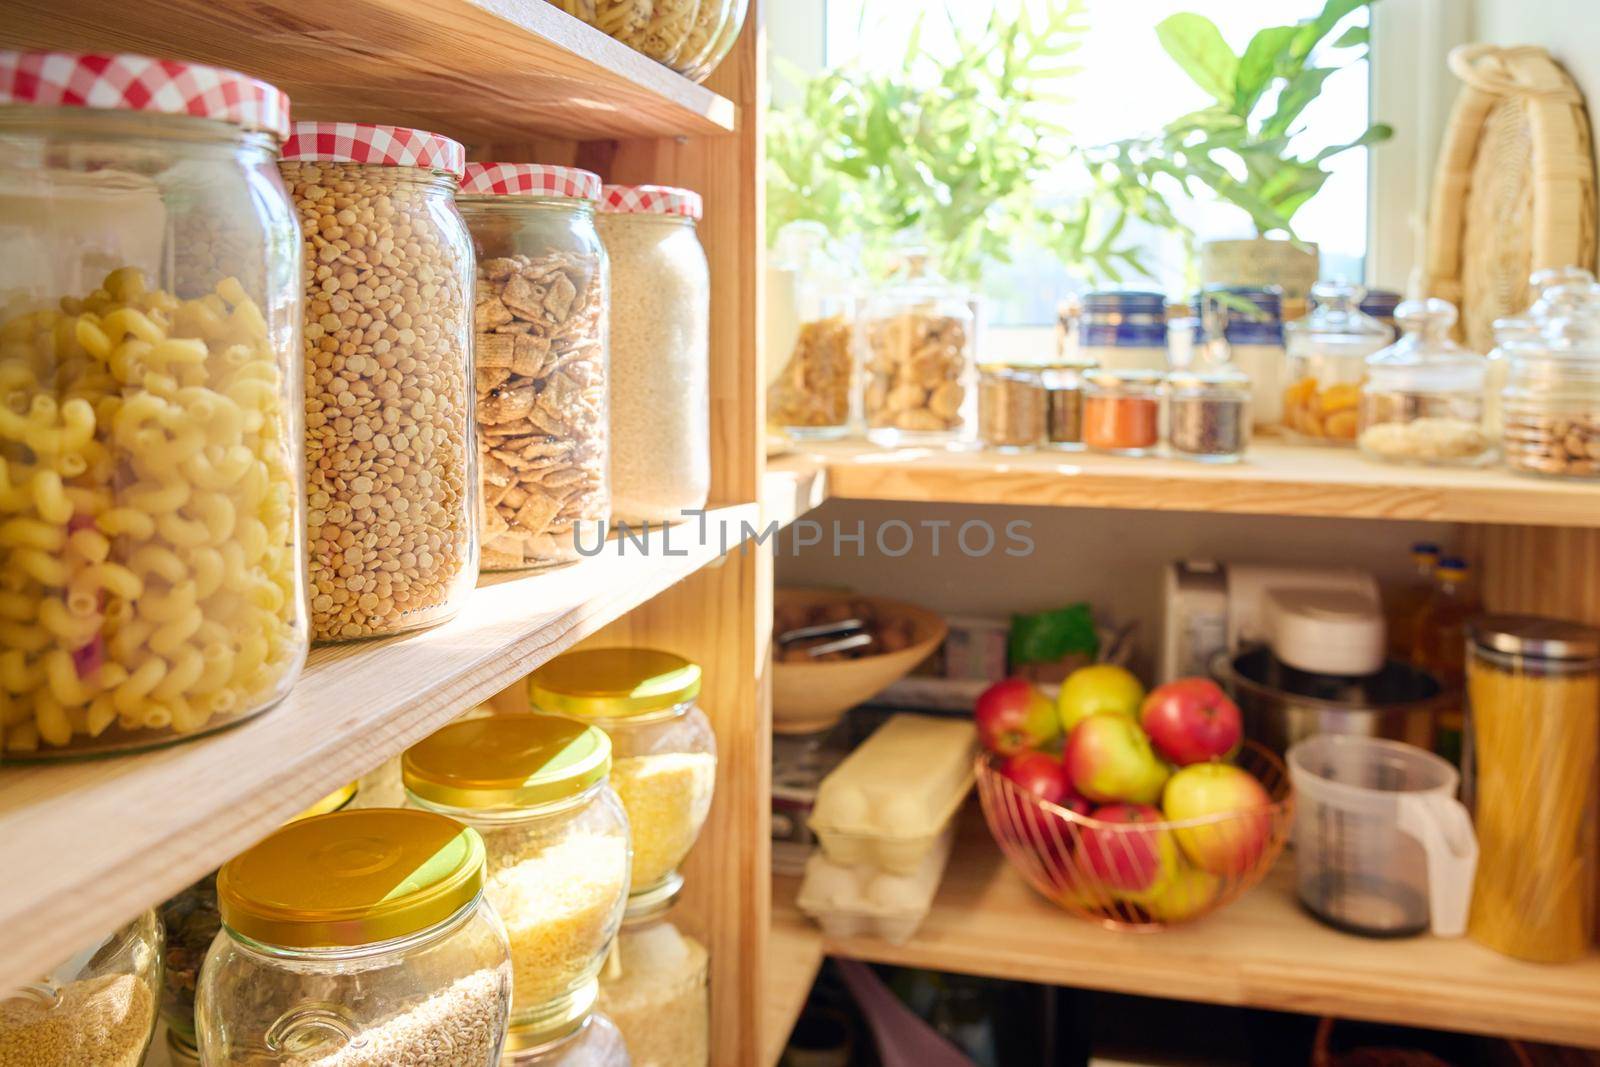 Storage of food in the kitchen in the pantry. Cereals, spices, pasta, nuts, flour in jars and containers, kitchen utensils. Cooking at home, stocking food, household